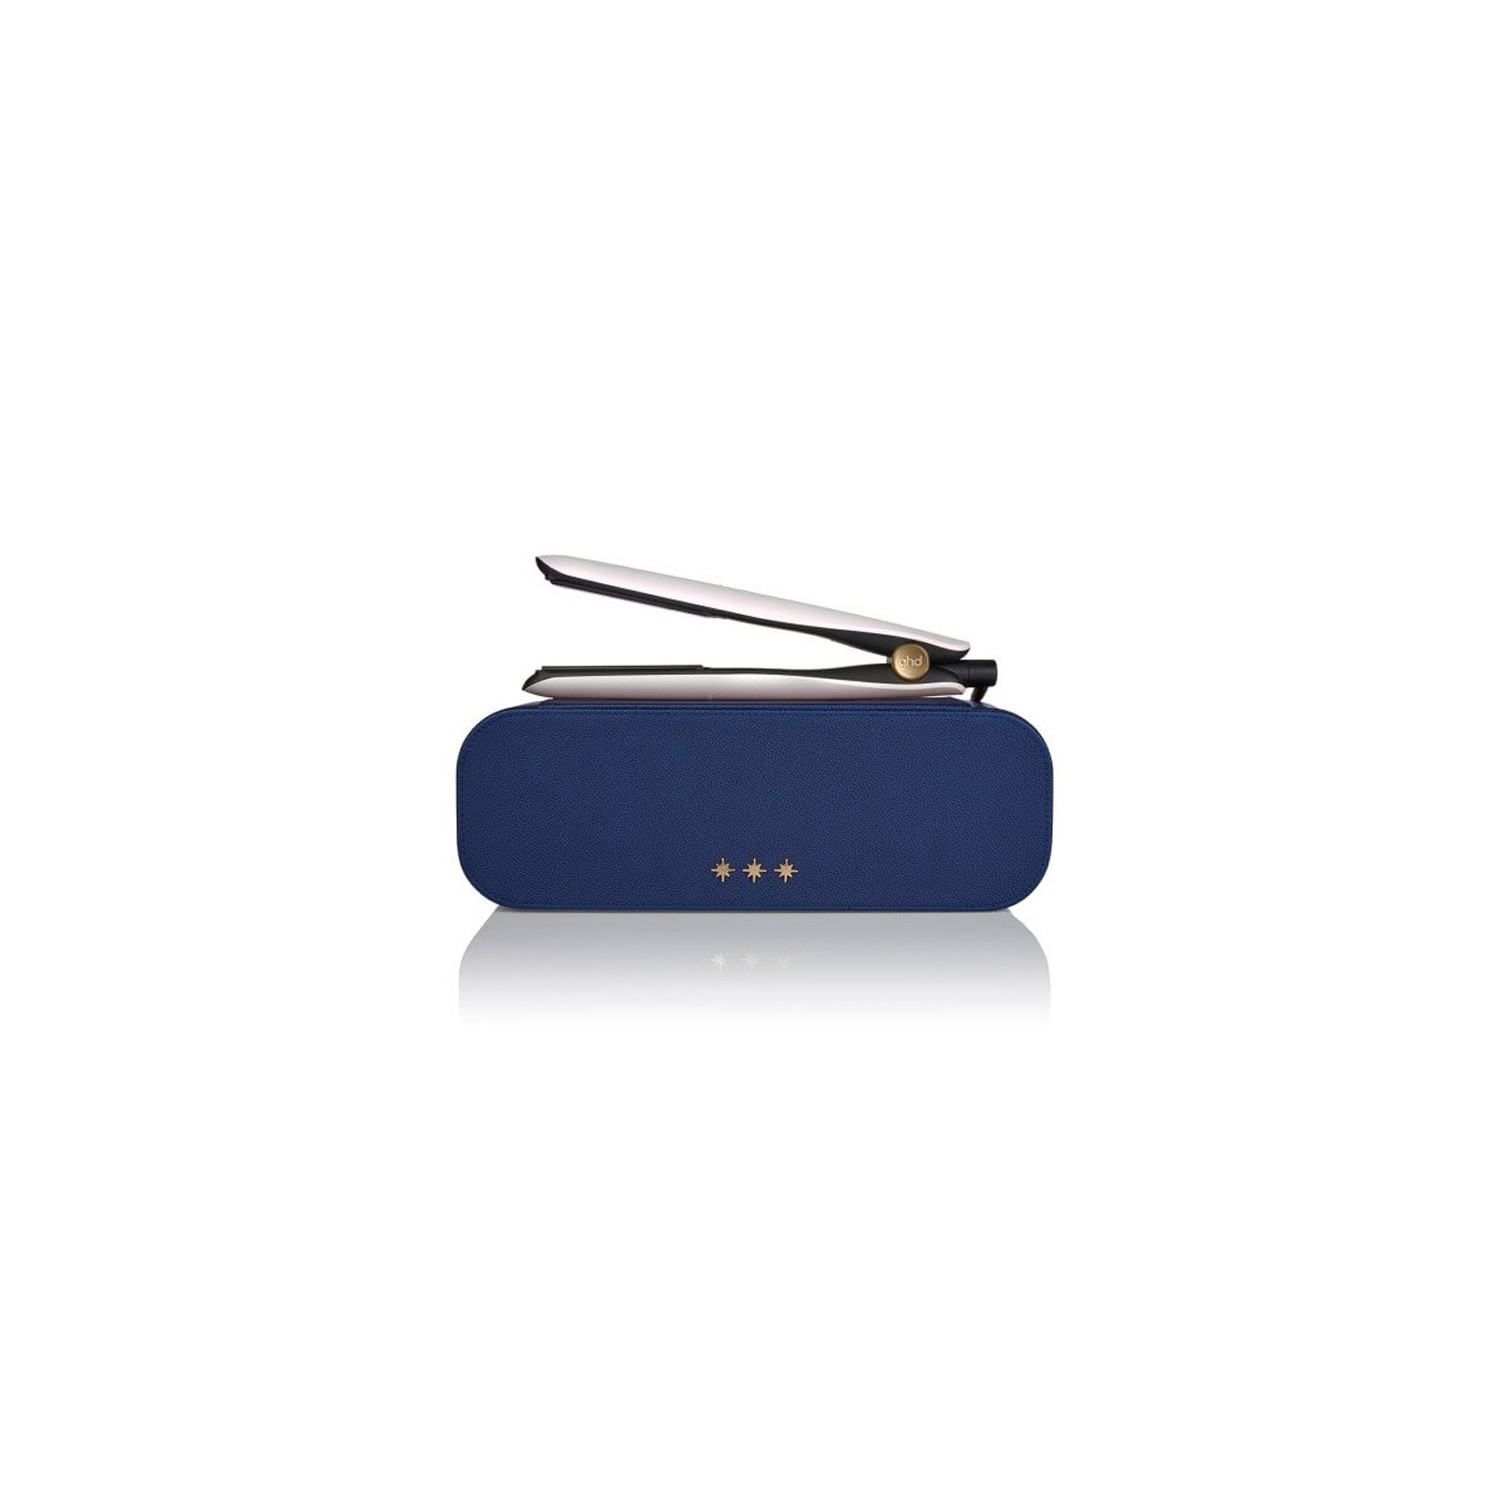 Ghd Piastra Wish Upon A Star Gold Styler (Le)